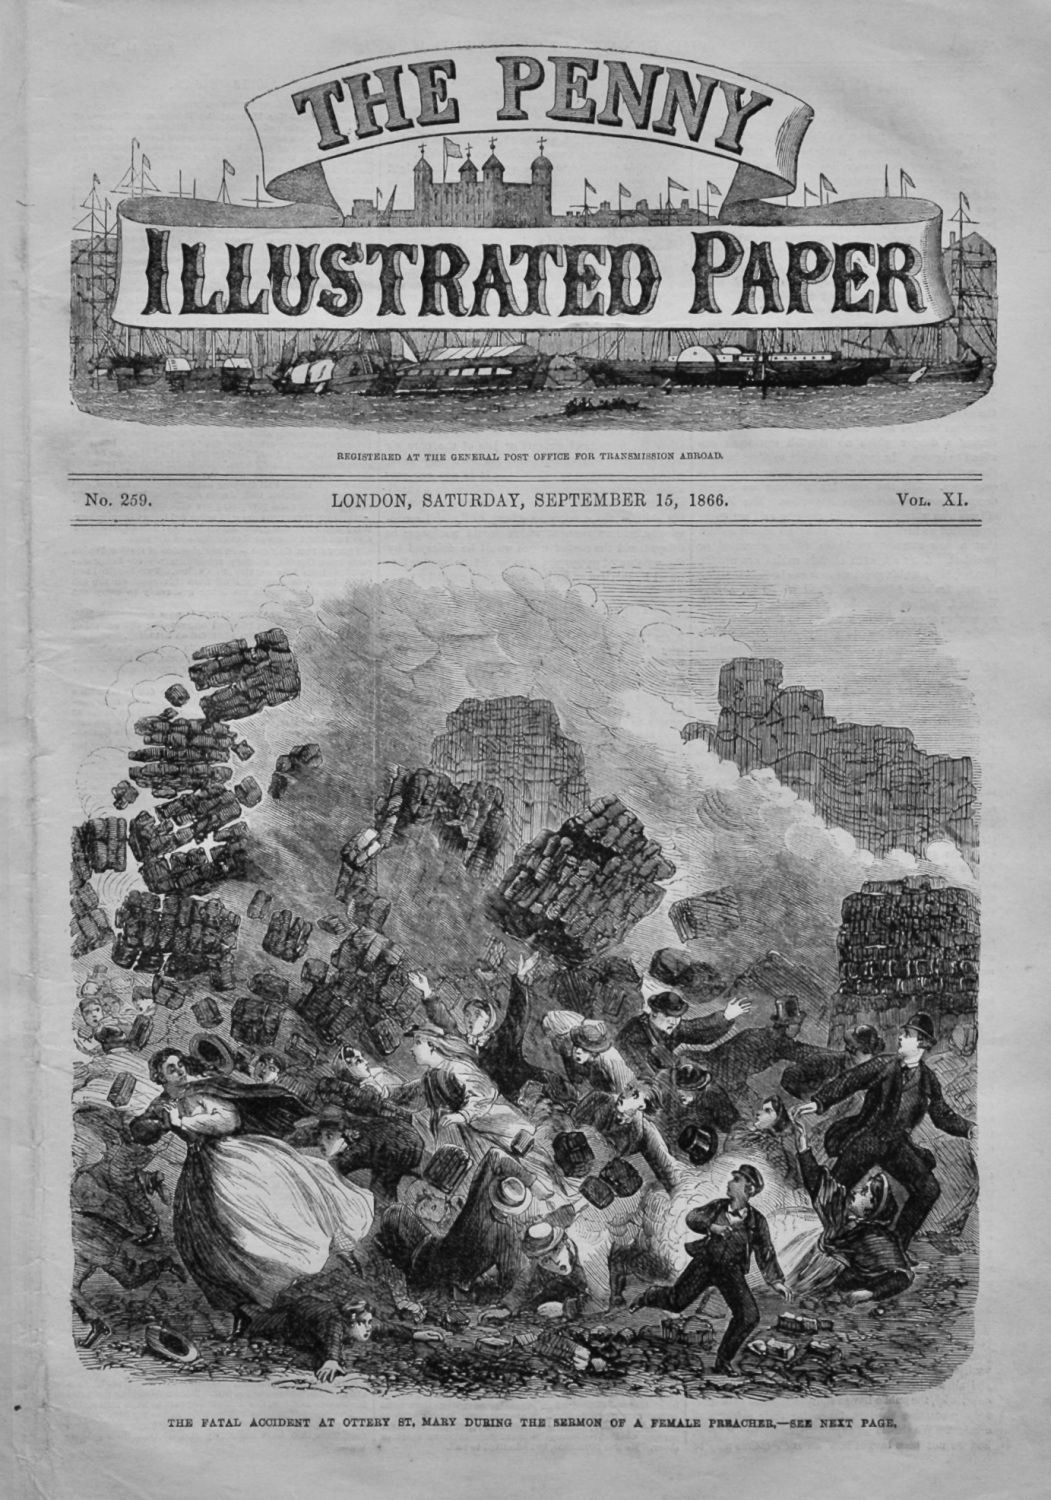 The Penny Illustrated, September 15th, 1866.